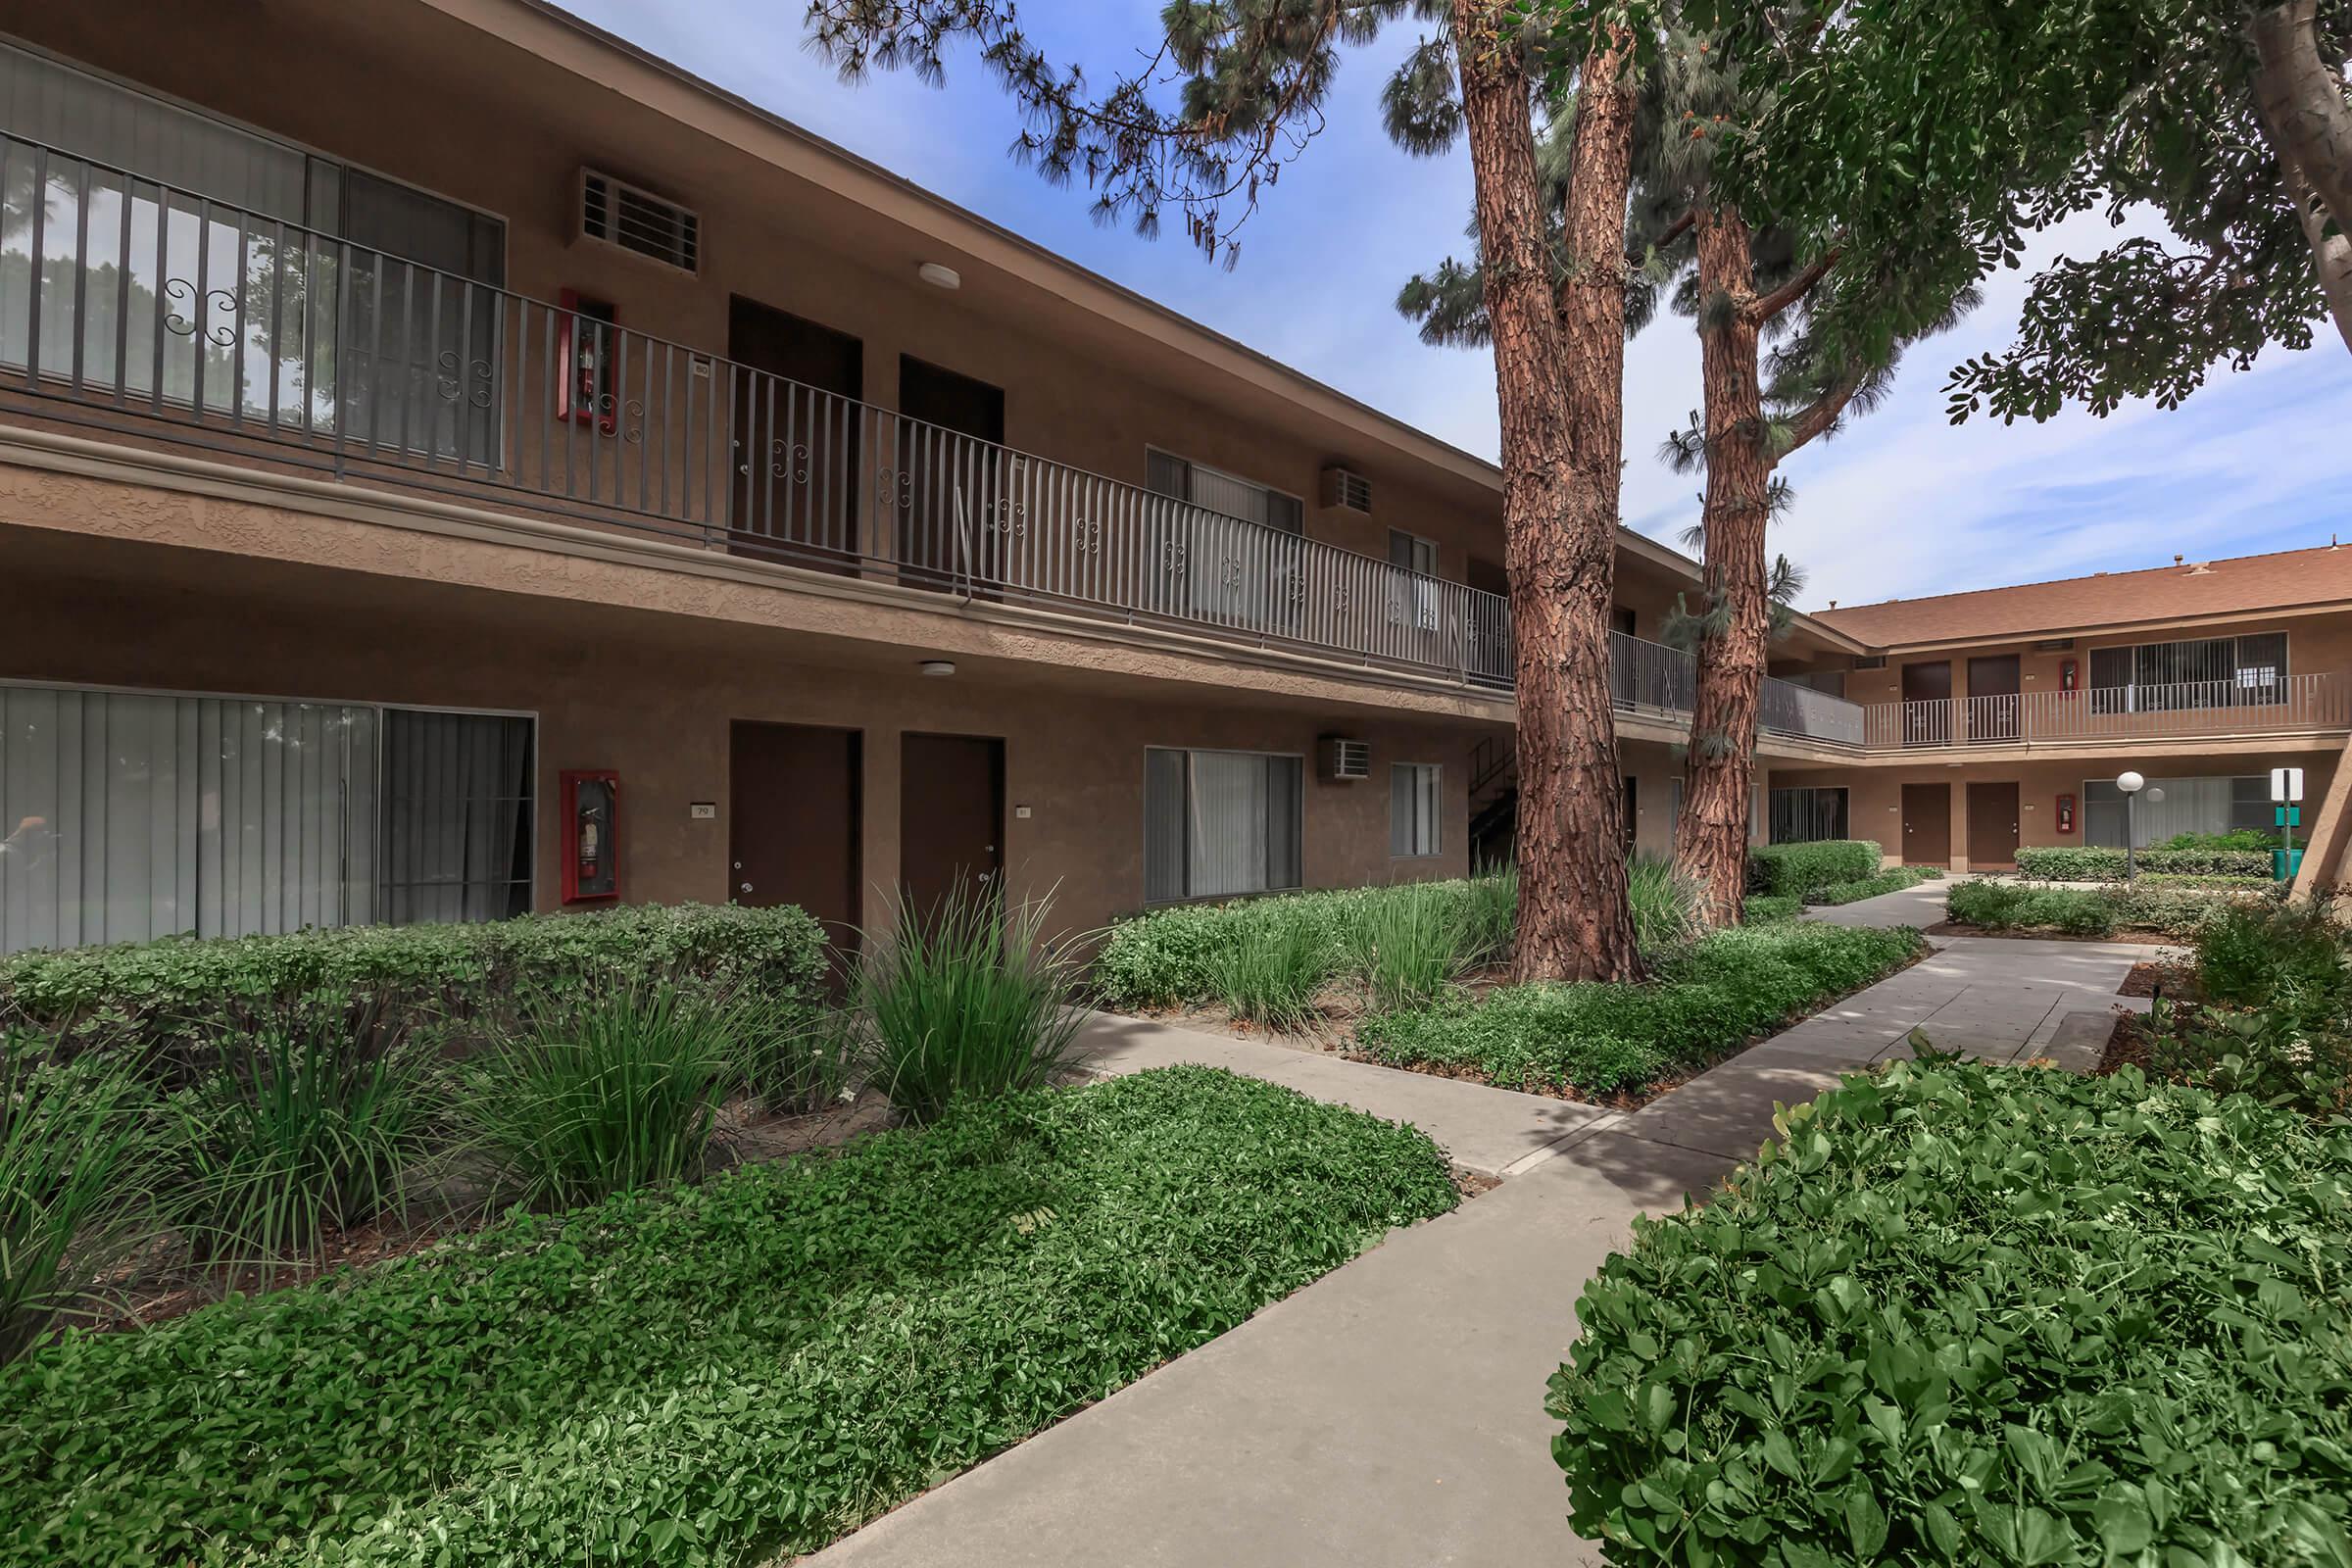 La Ramada Apartment Homes community building with green landscaping